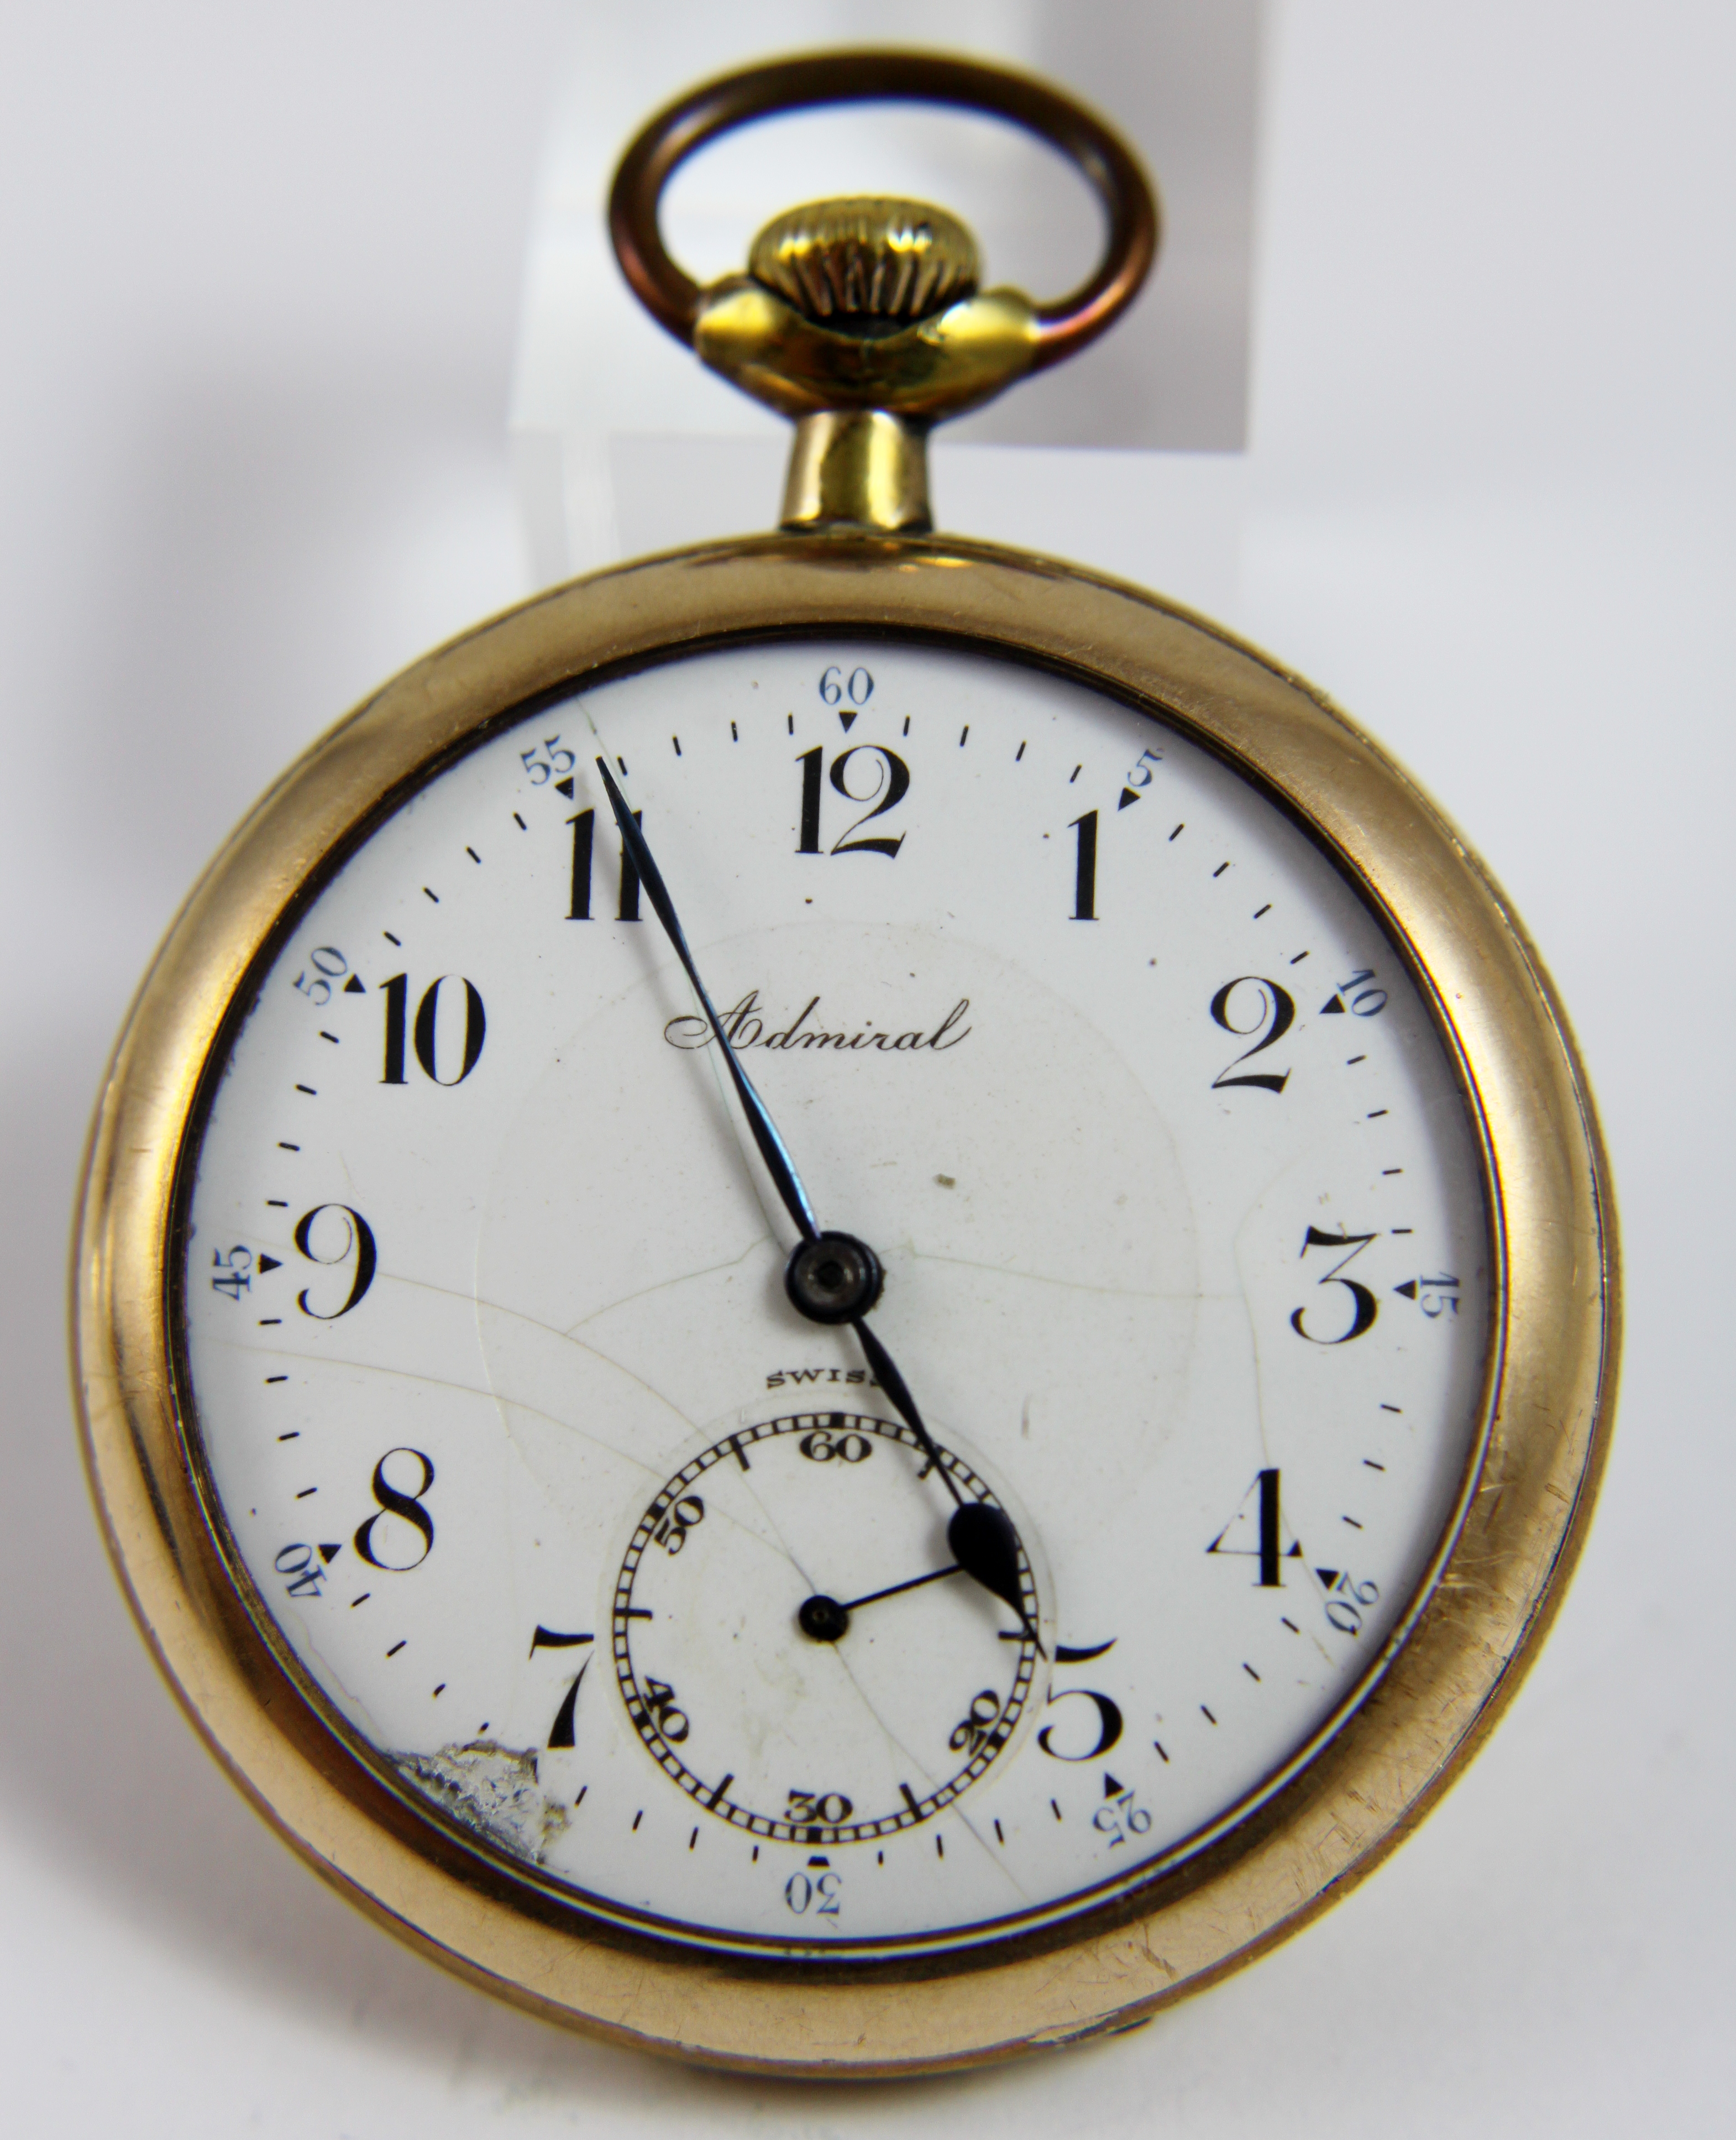 Admiral pocket watch by Tacy Watch Company, Fortune gold filled case No 1913665, Swiss movement, pat